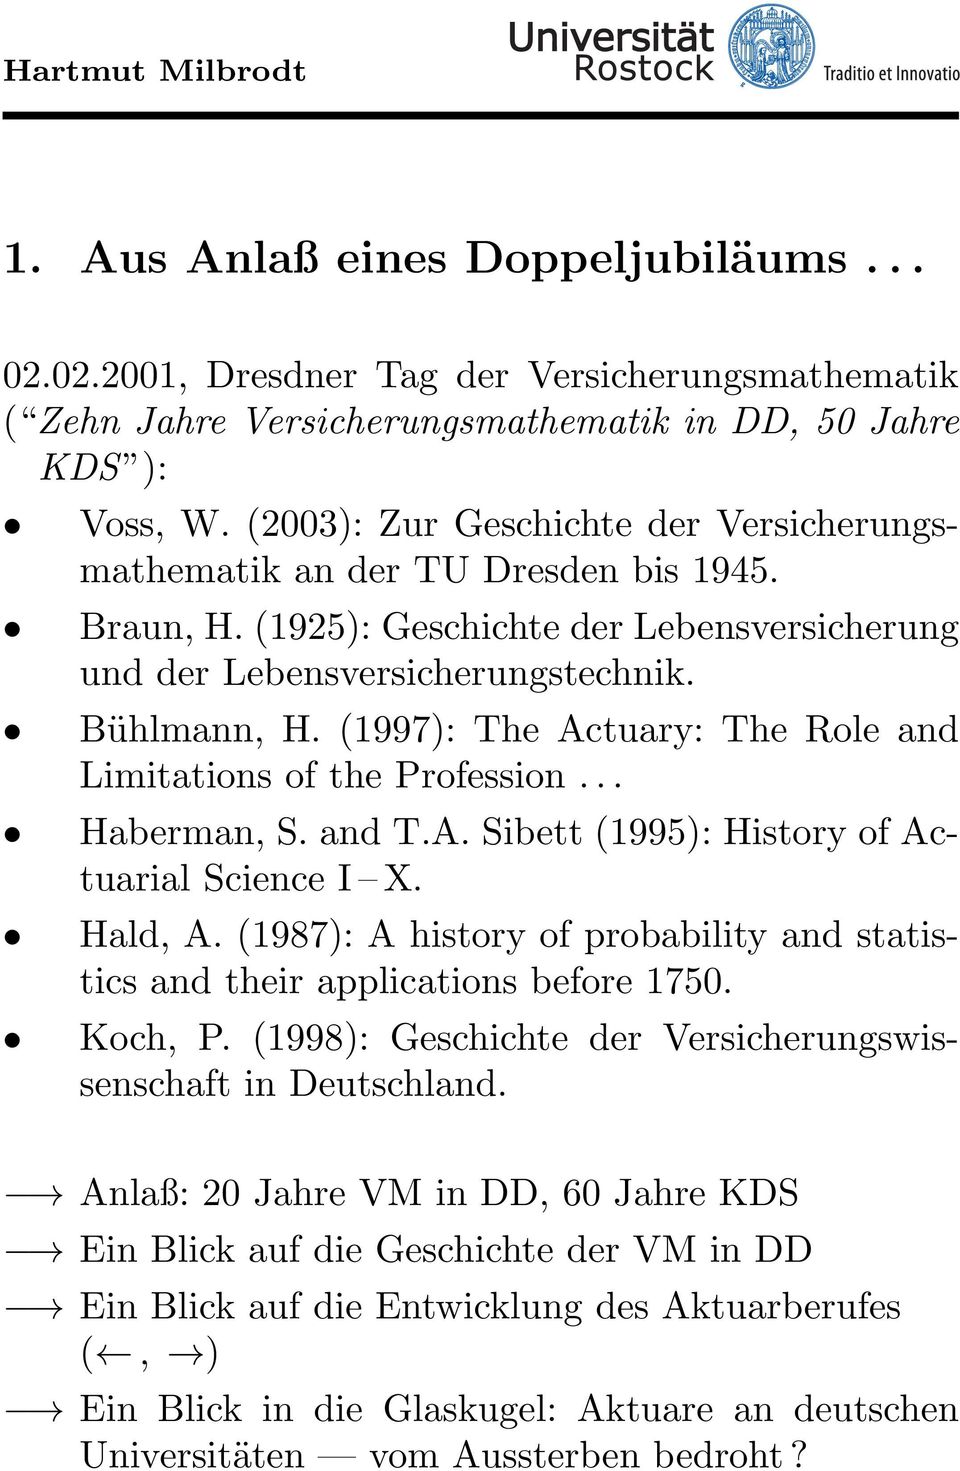 the Profession Haberman, S and TA Sibett (1995): History of Actuarial Science I X Hald, A (1987): A history of probability and statistics and their applications before 1750 Koch, P (1998): Geschichte